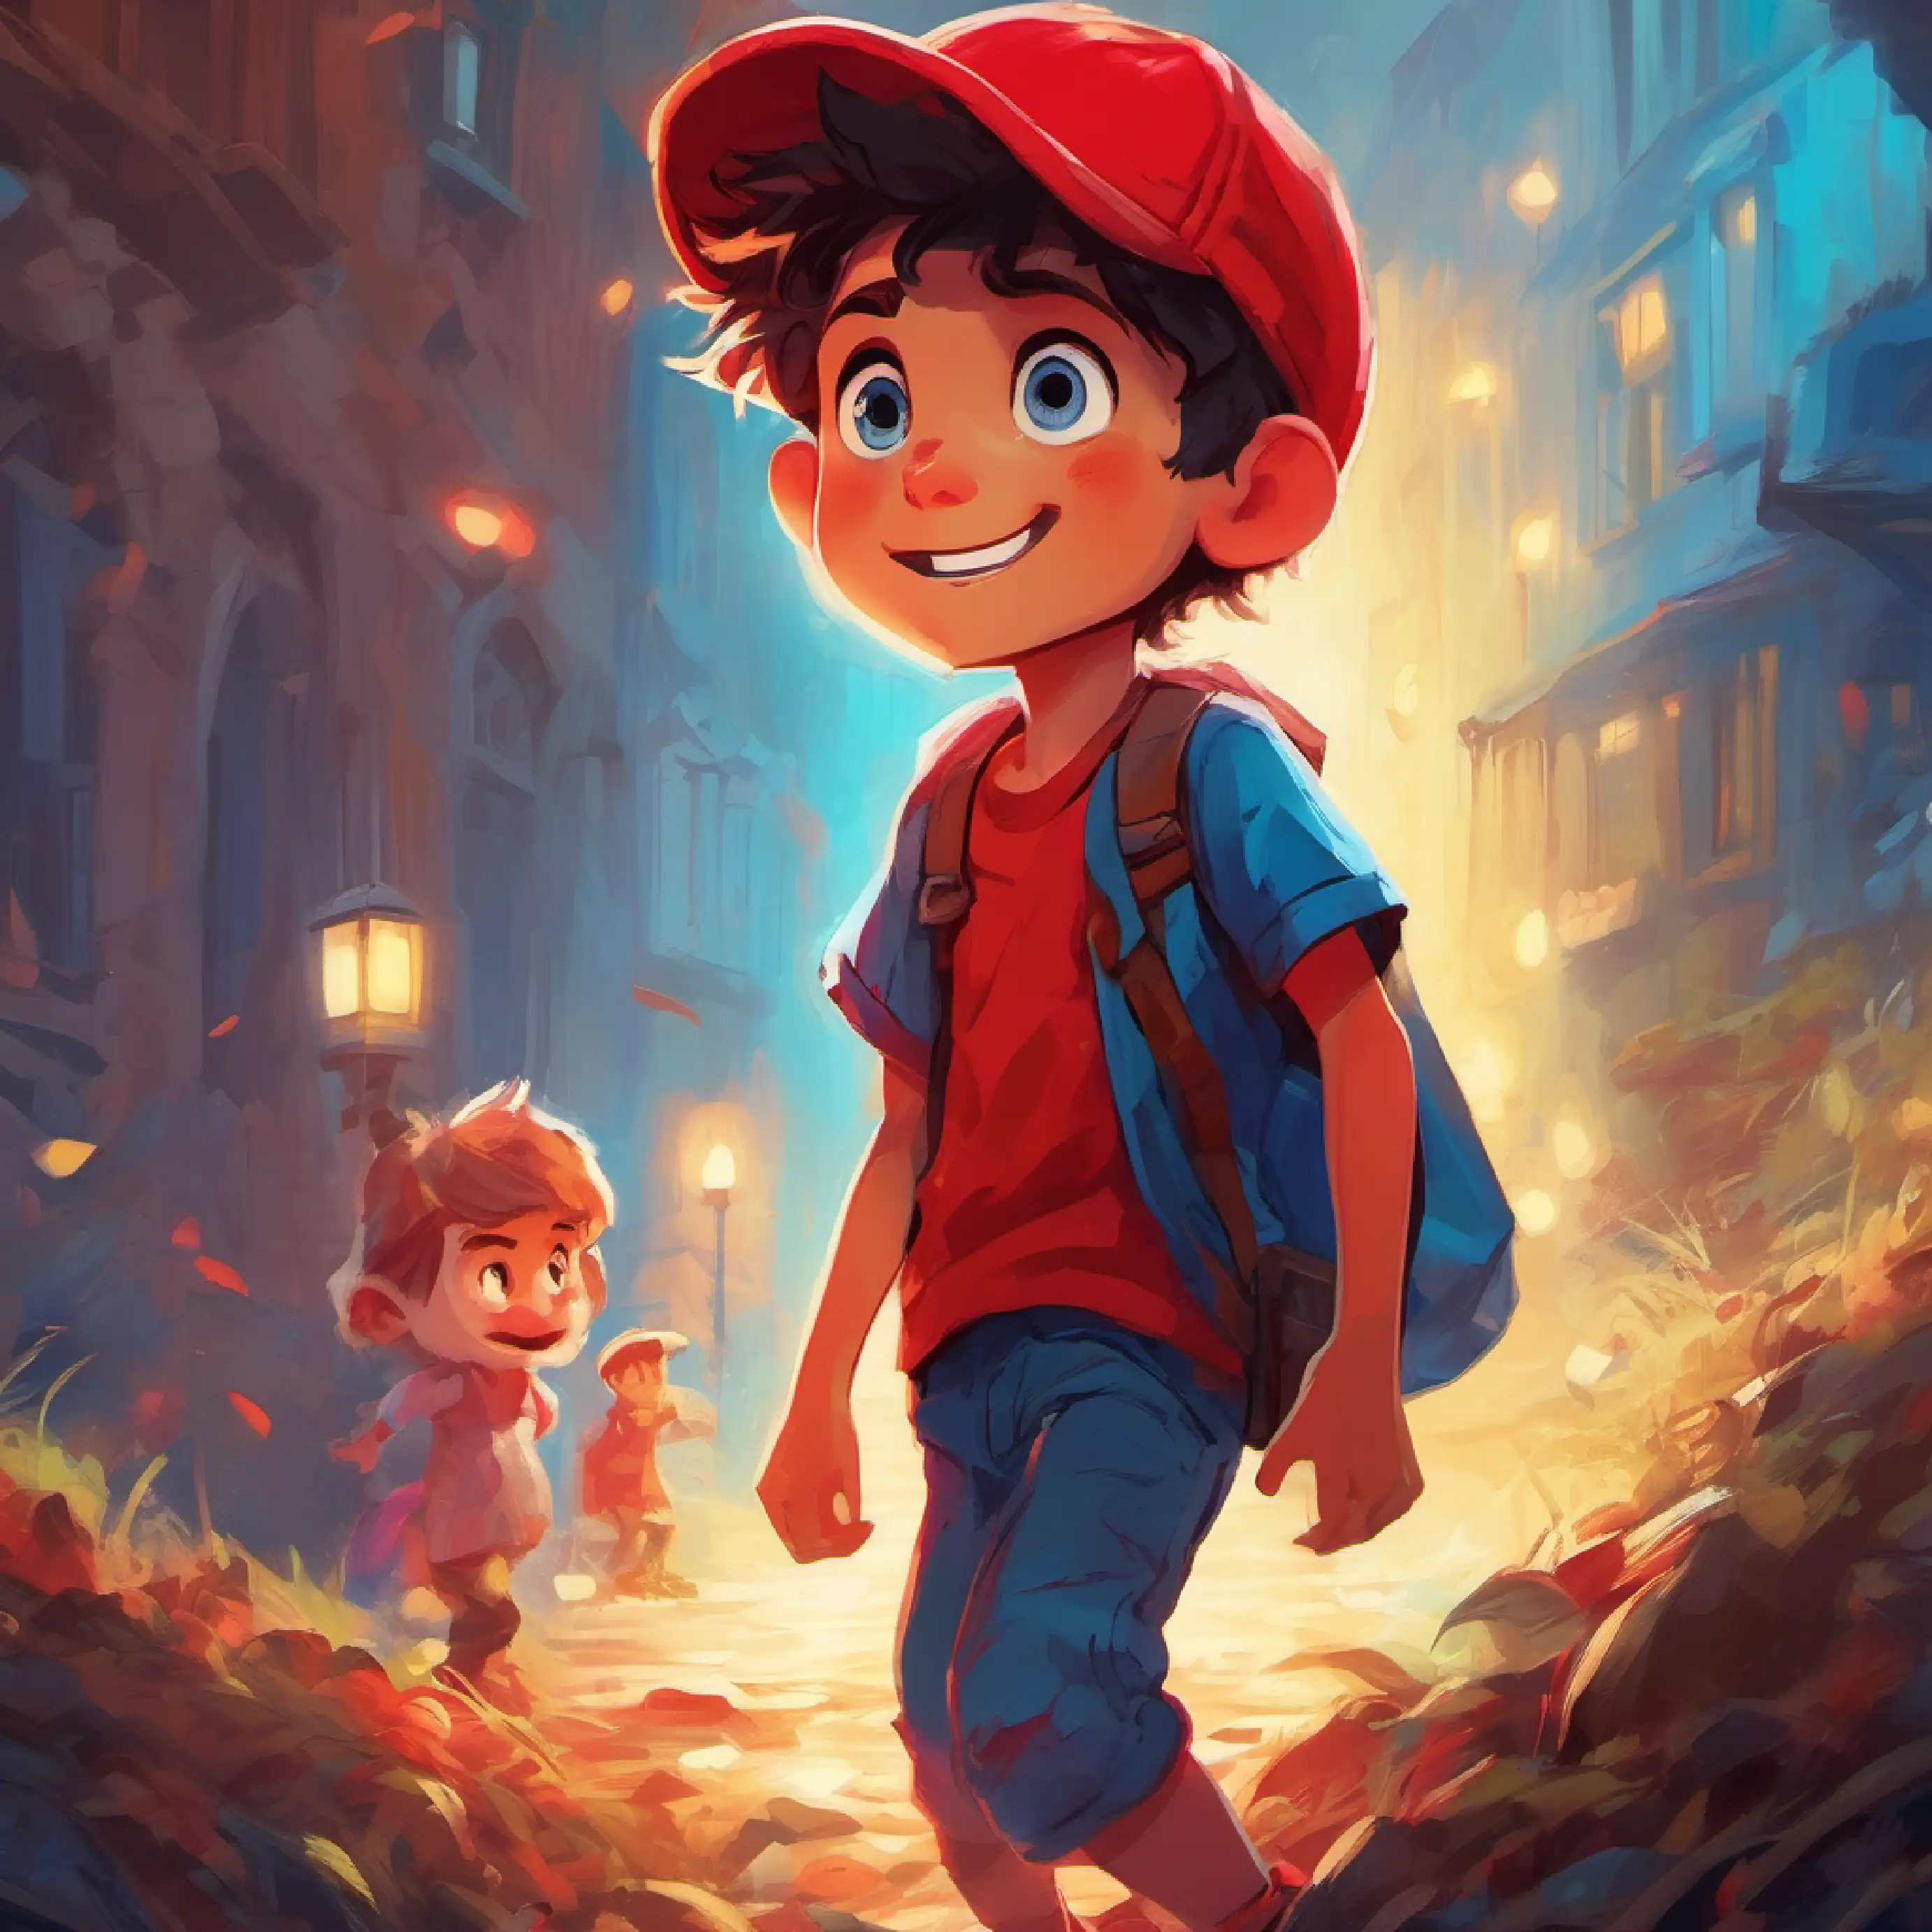 Tense moment where Boy with brave heart, wearing a red cap, curious eyes faces Zombie with a friendly smile, sparkling blue eyes, messy hair.